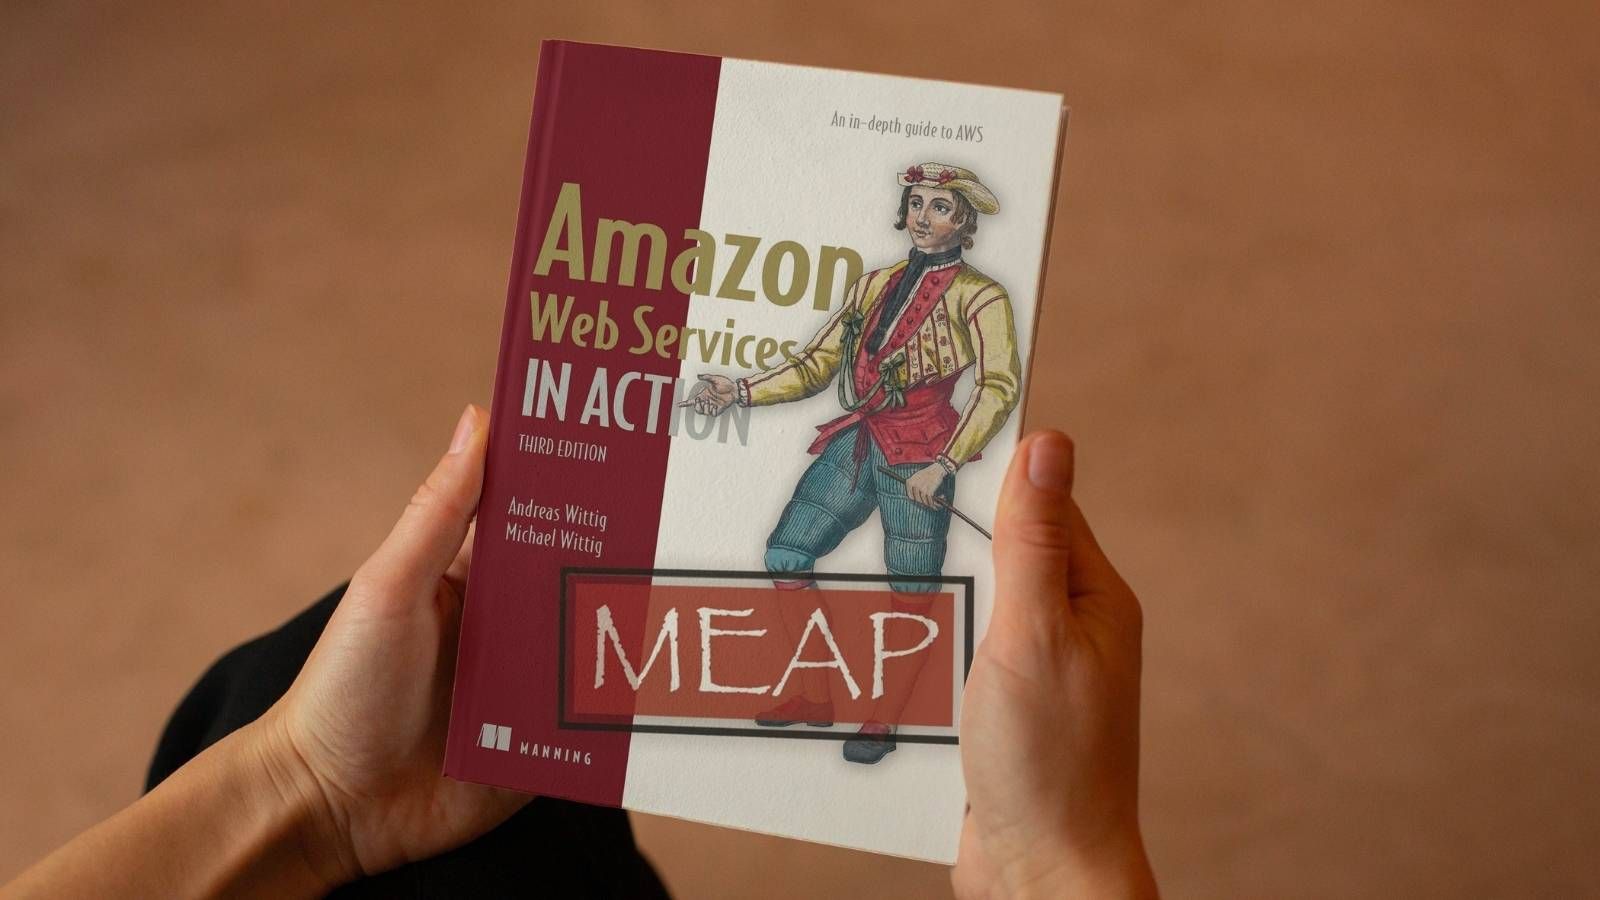 Amazon Web Services in Action 3rd Edition: Early Access